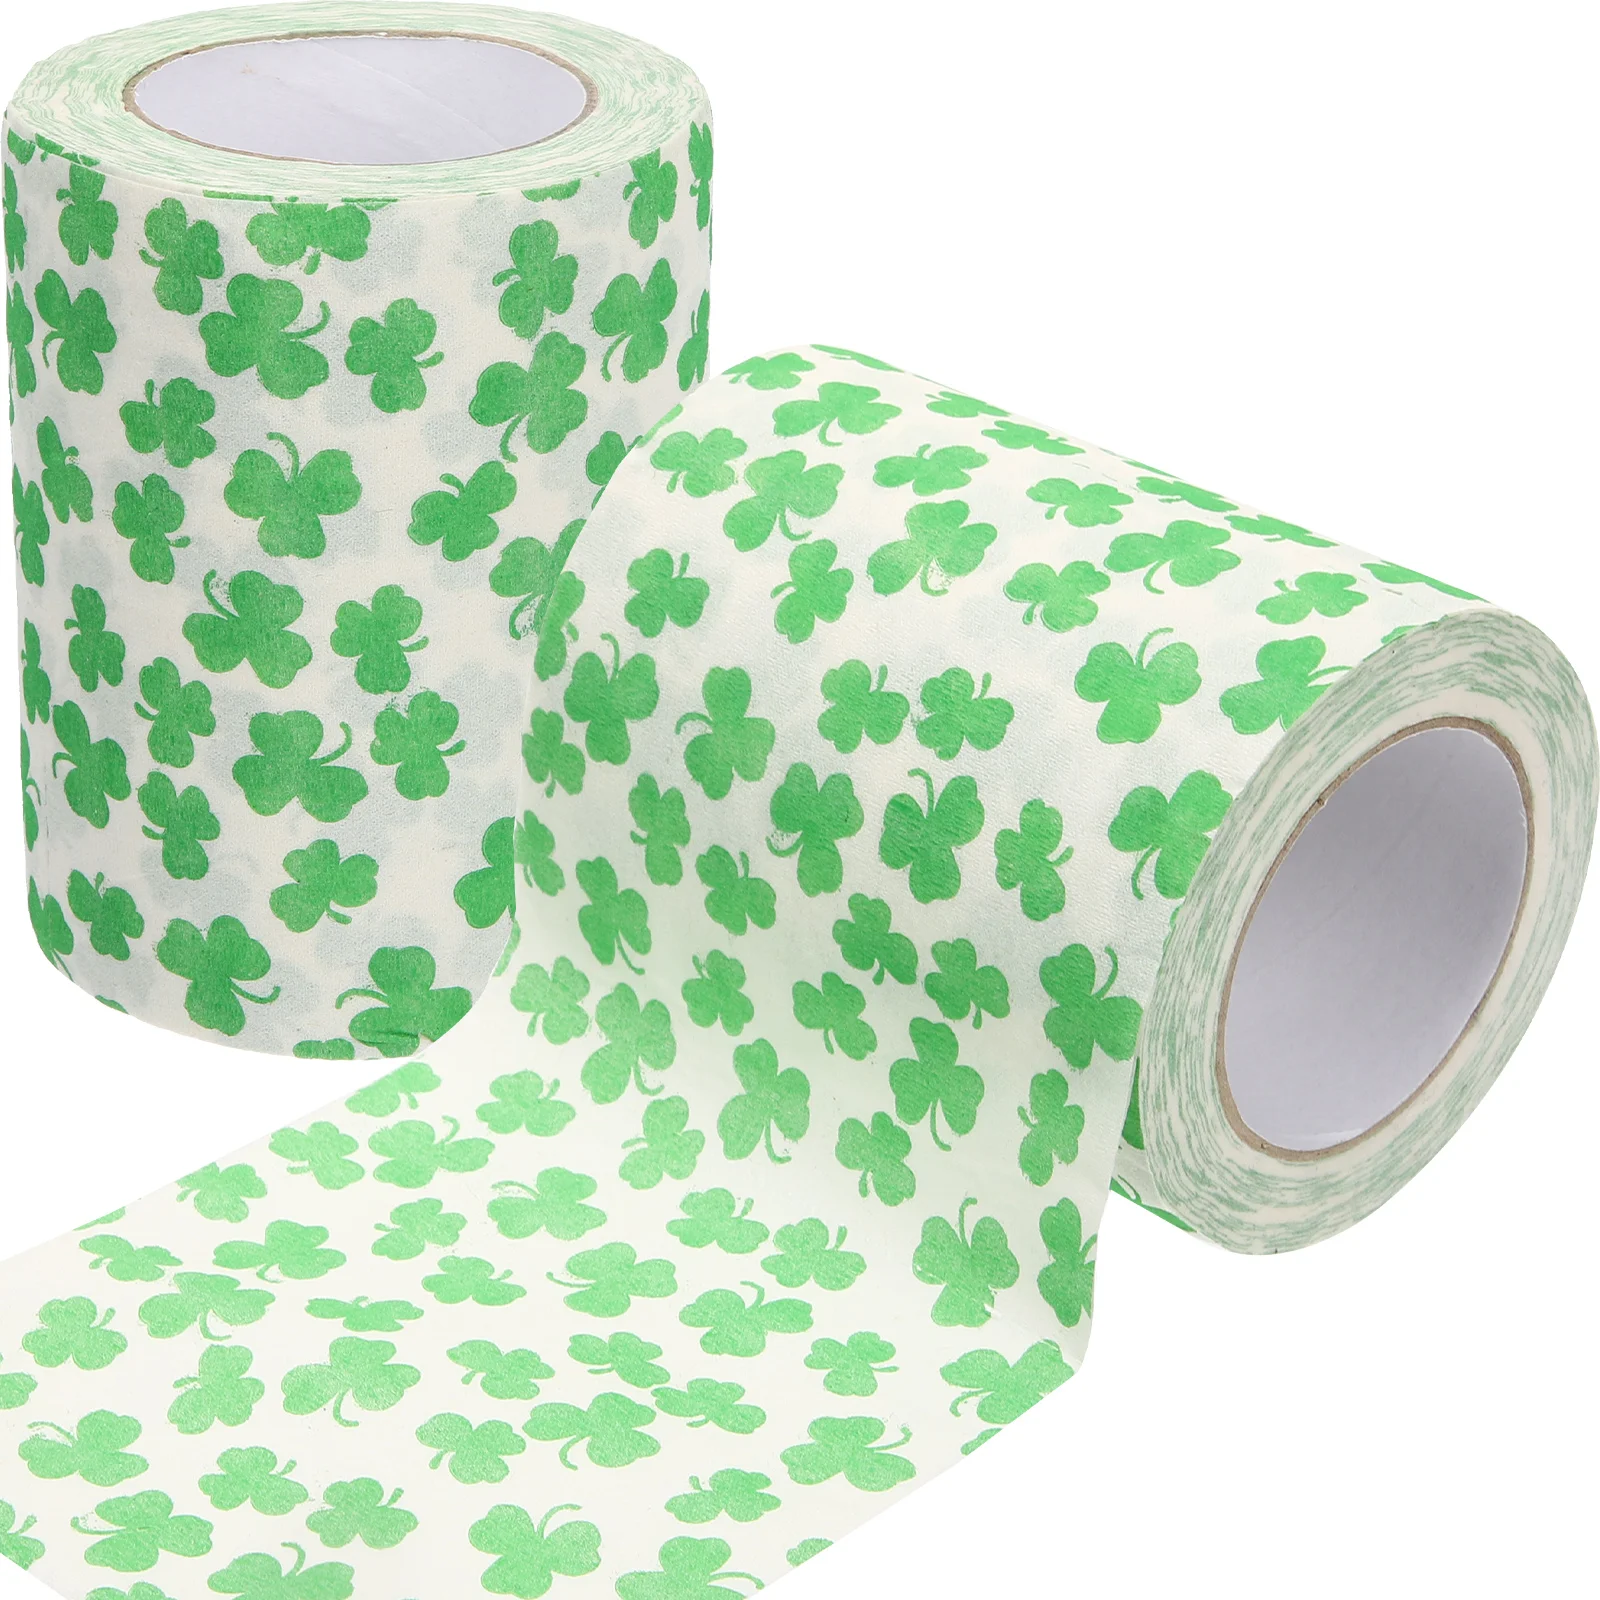 

2 Rolls Printed Paper Napkins Printing Toilet Bathroom Dinning Table Decor Prints Used Papers Dining Tissue